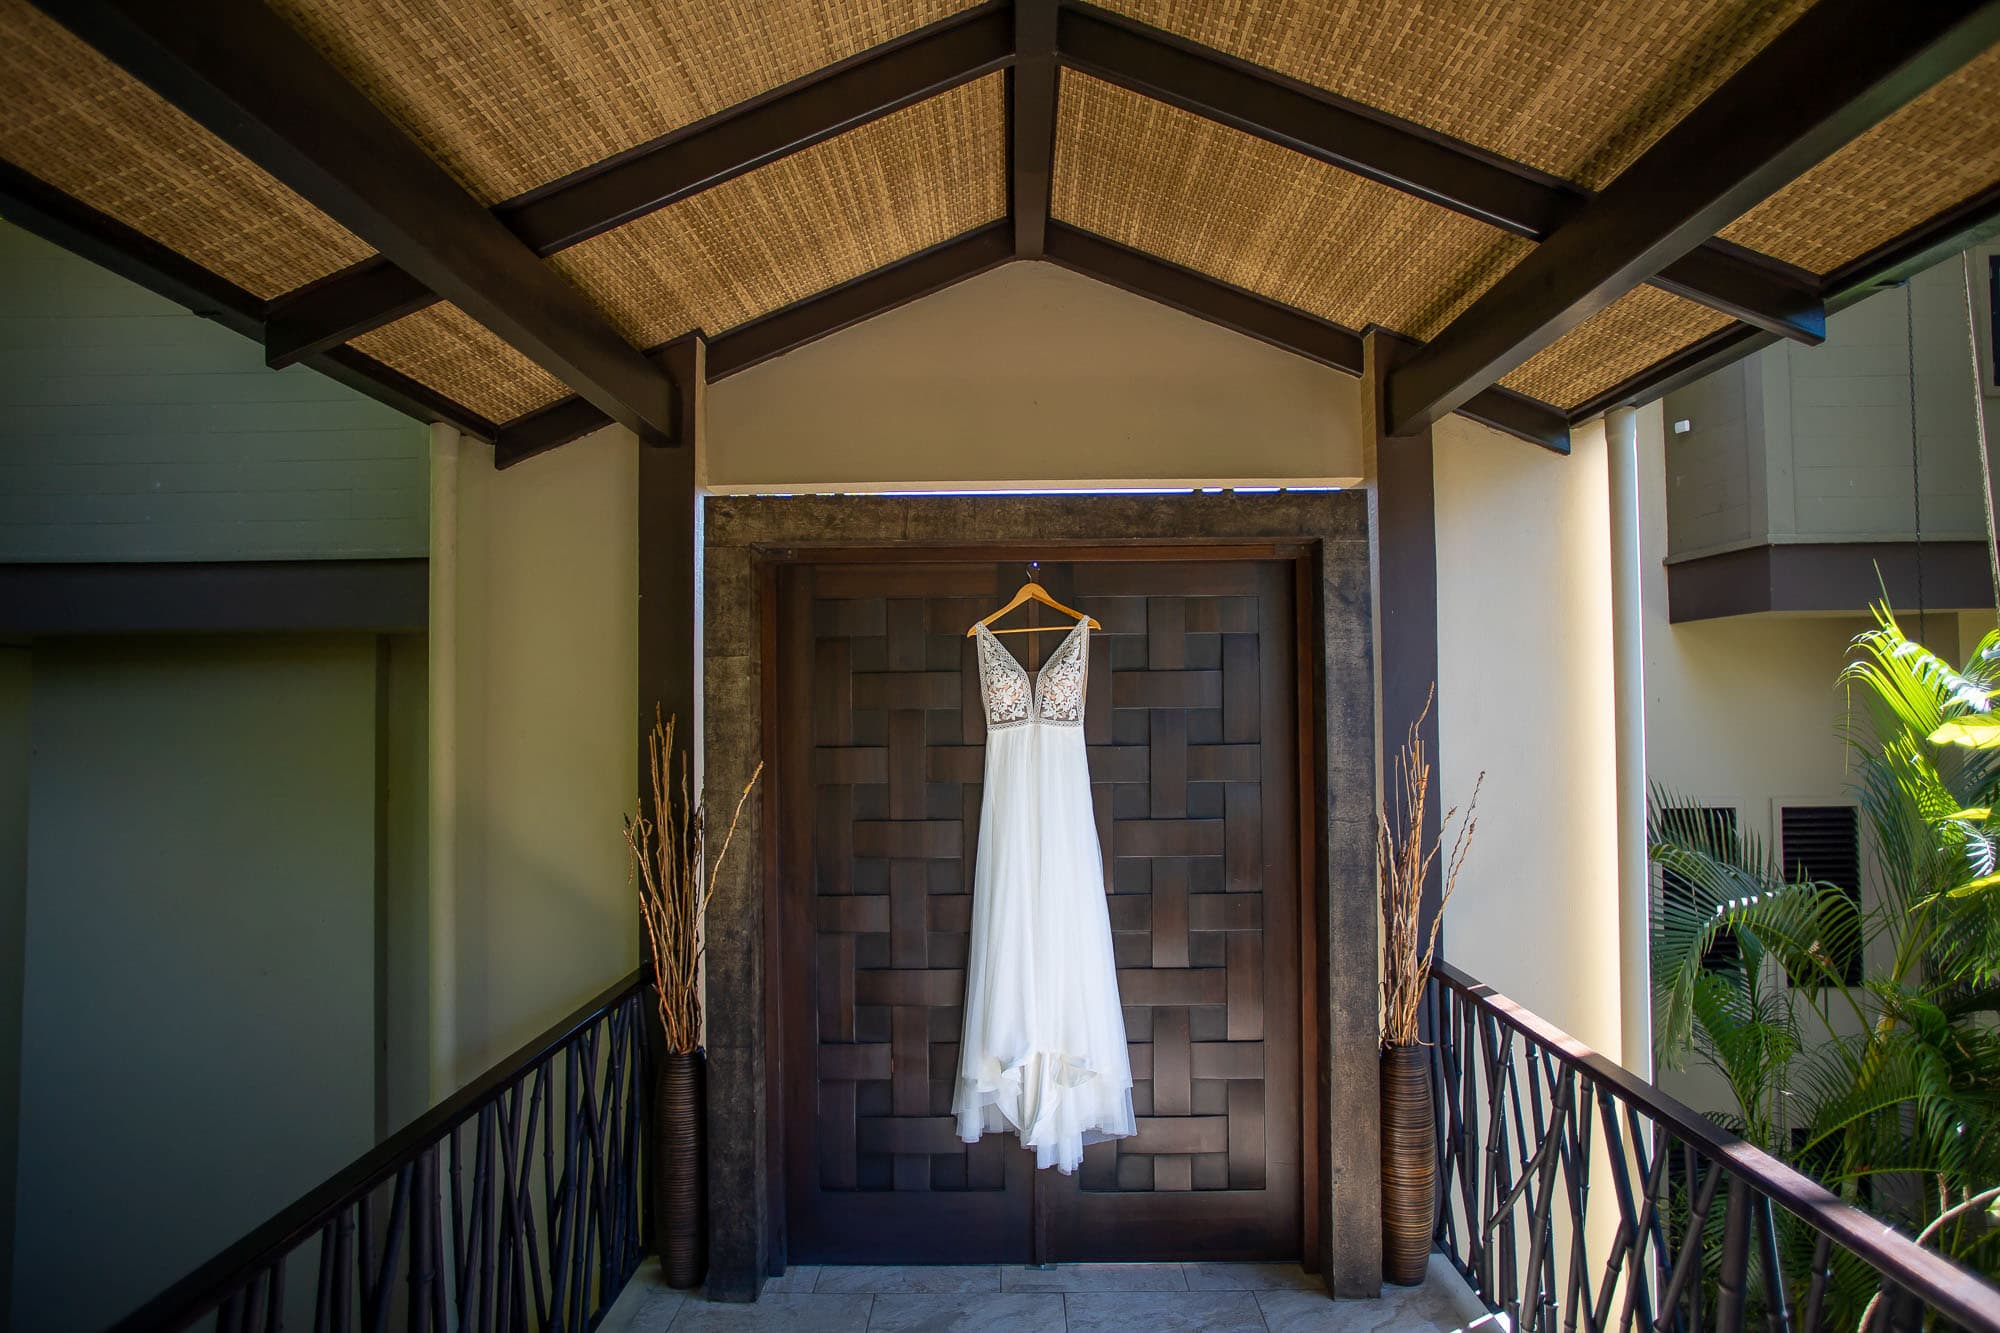 The bride's dress ready for her small wedding in costa rica